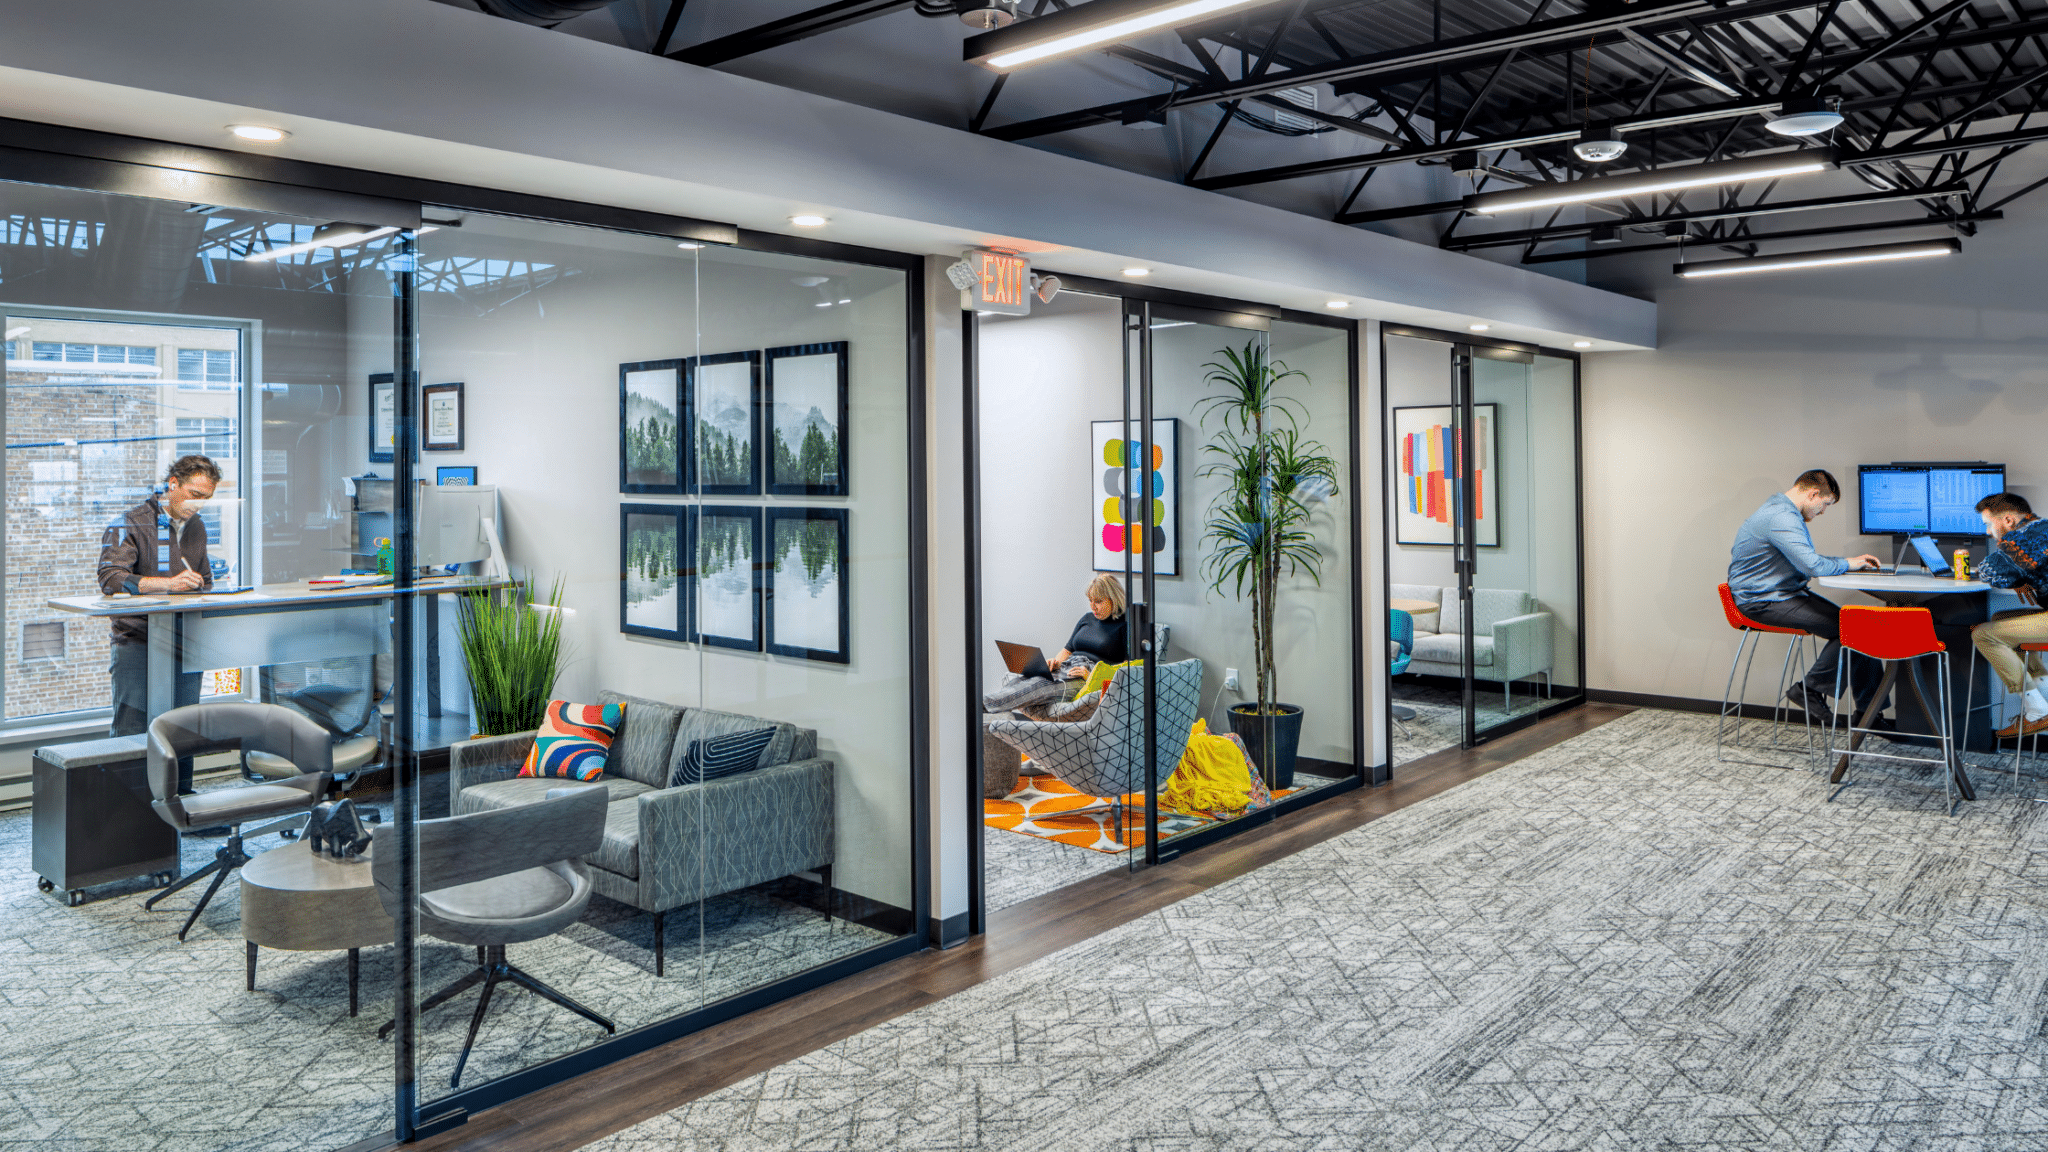 A modern office space showcasing the best office amenities for workplaces today